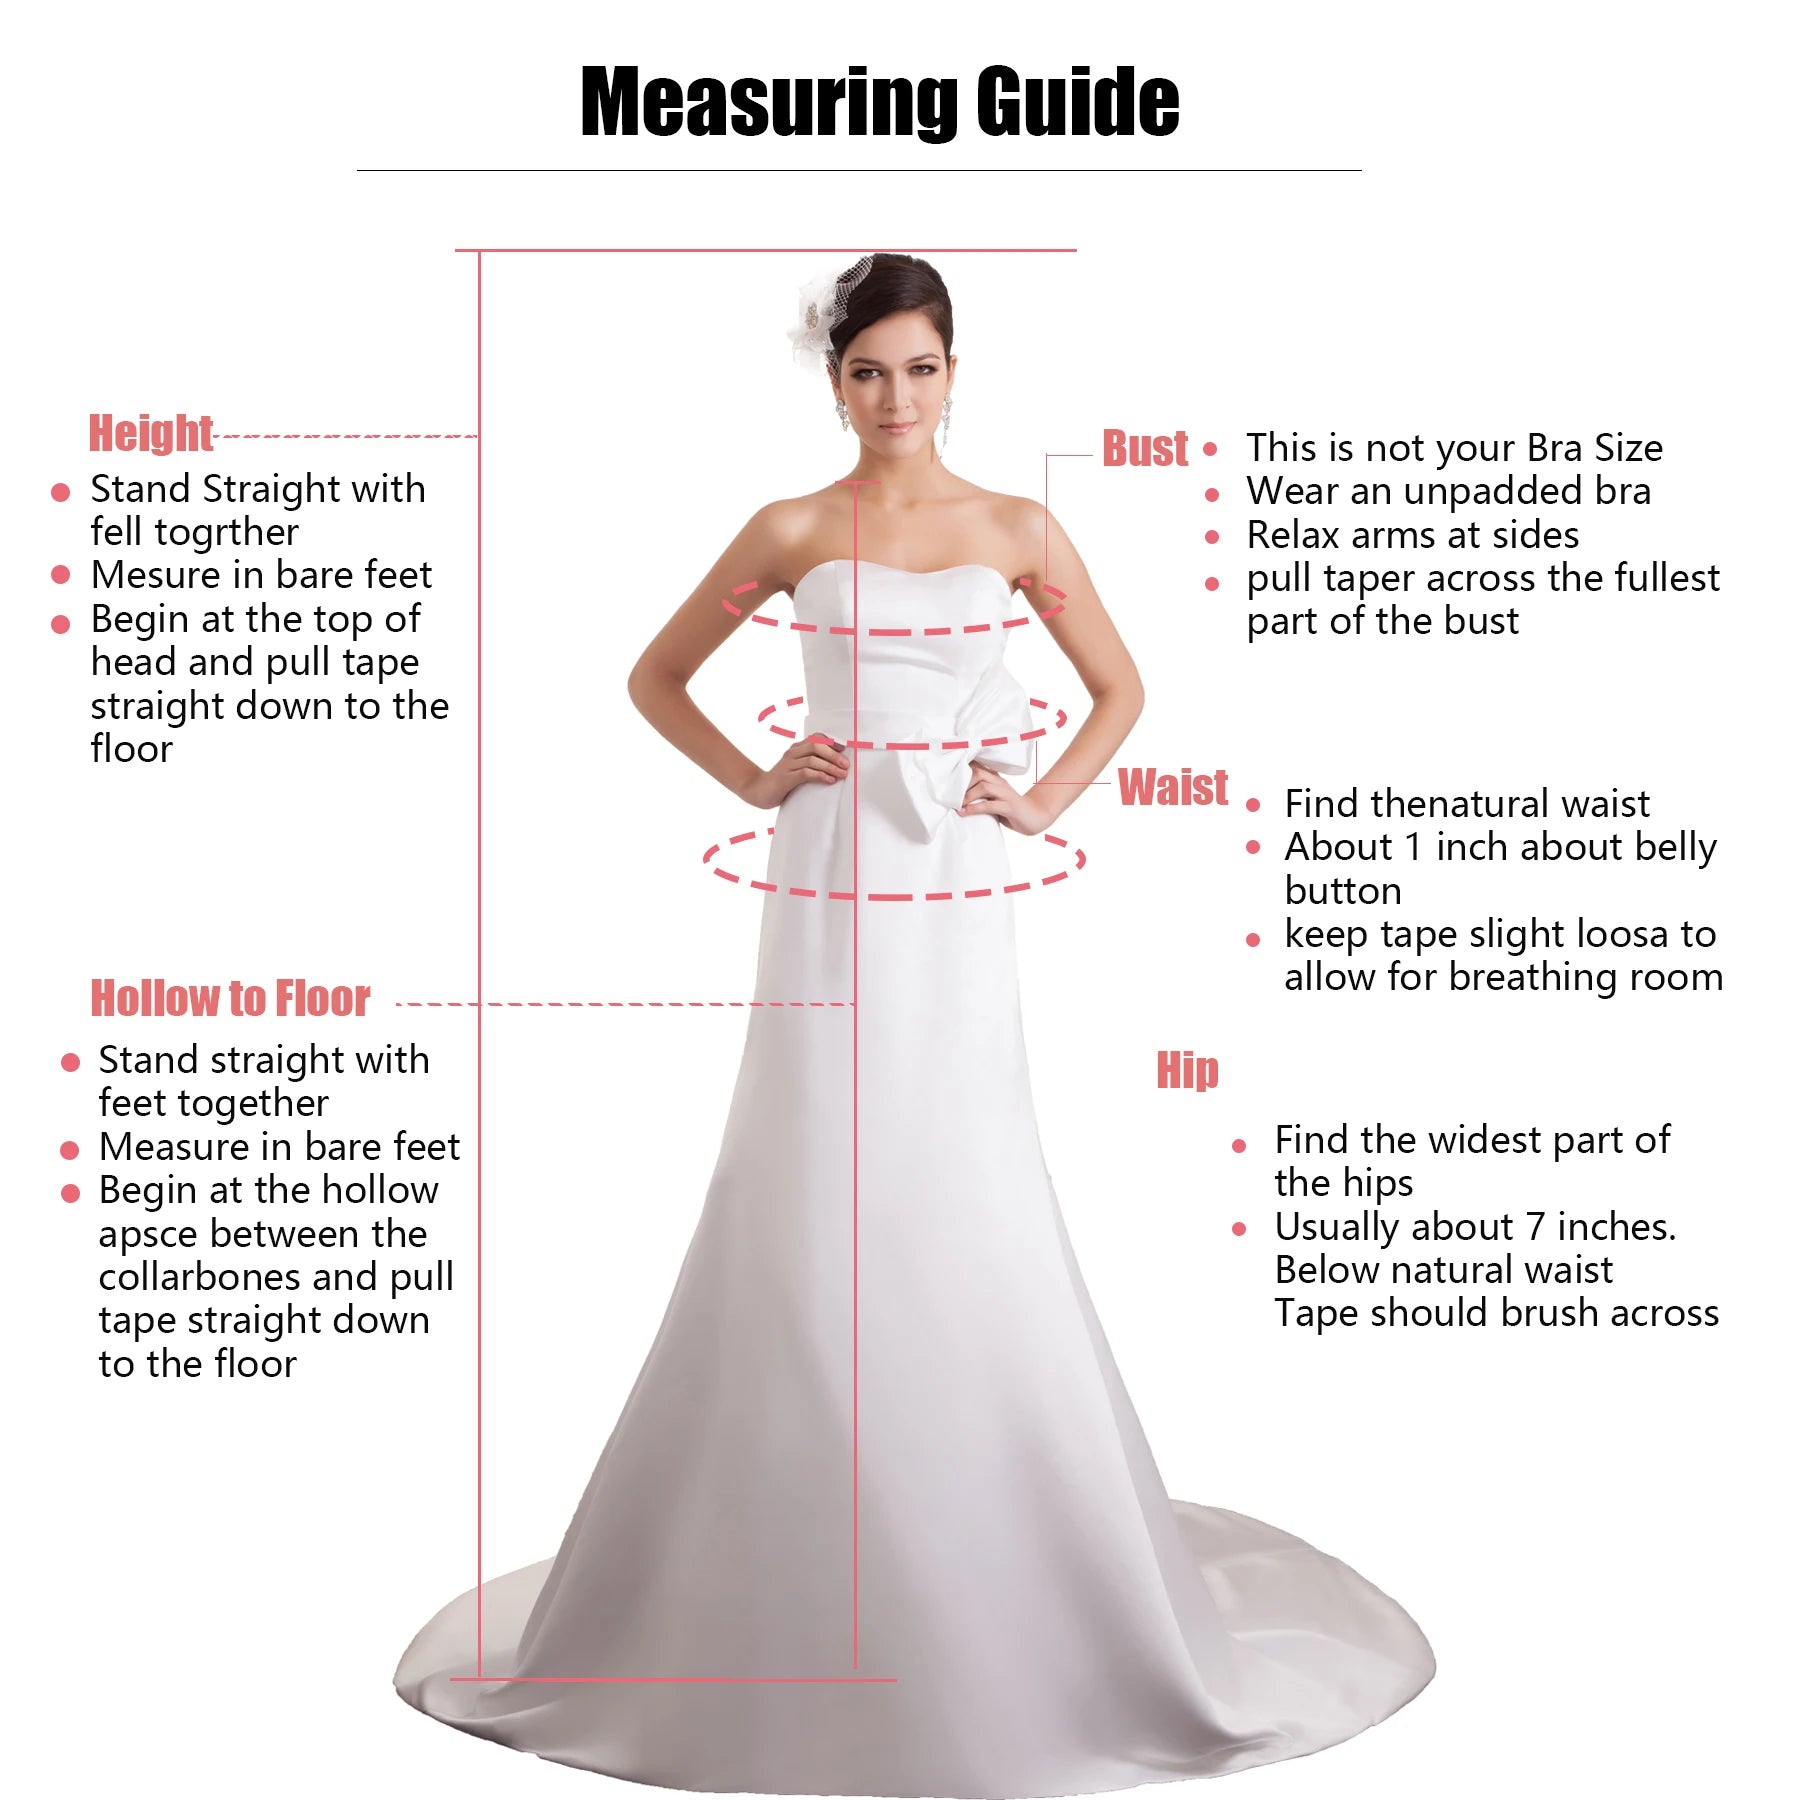 Classy Long Plus Size Wedding Dresses Sexy V Neck Sleeveless Backless with Slit A Line Sweep Train Custom Made Bridal Gowns